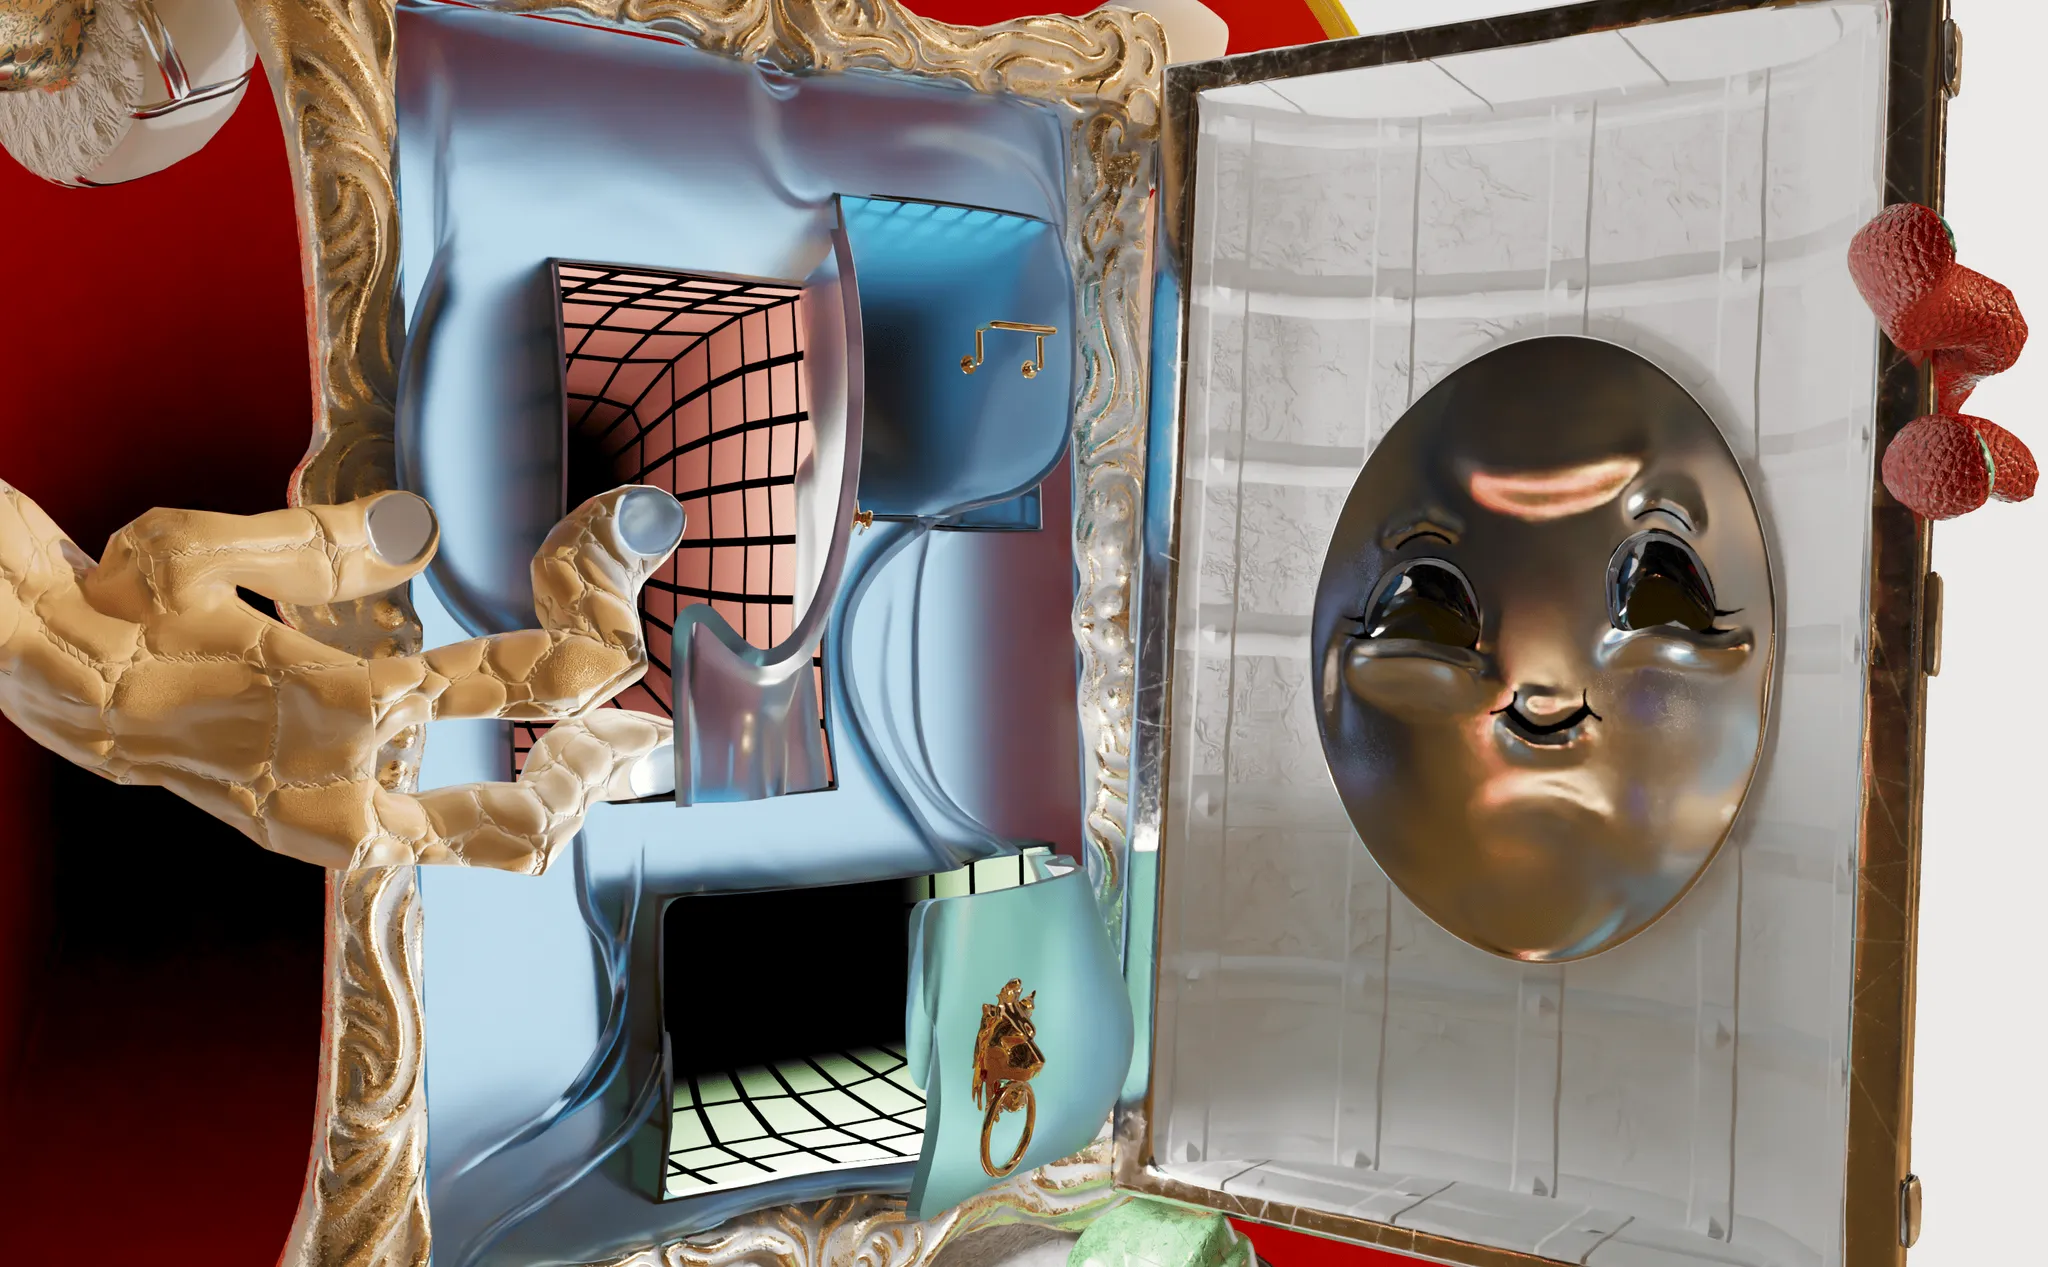 digital figure with a picture frame composing its body opens its chest up like a door, revealing virtual doorways